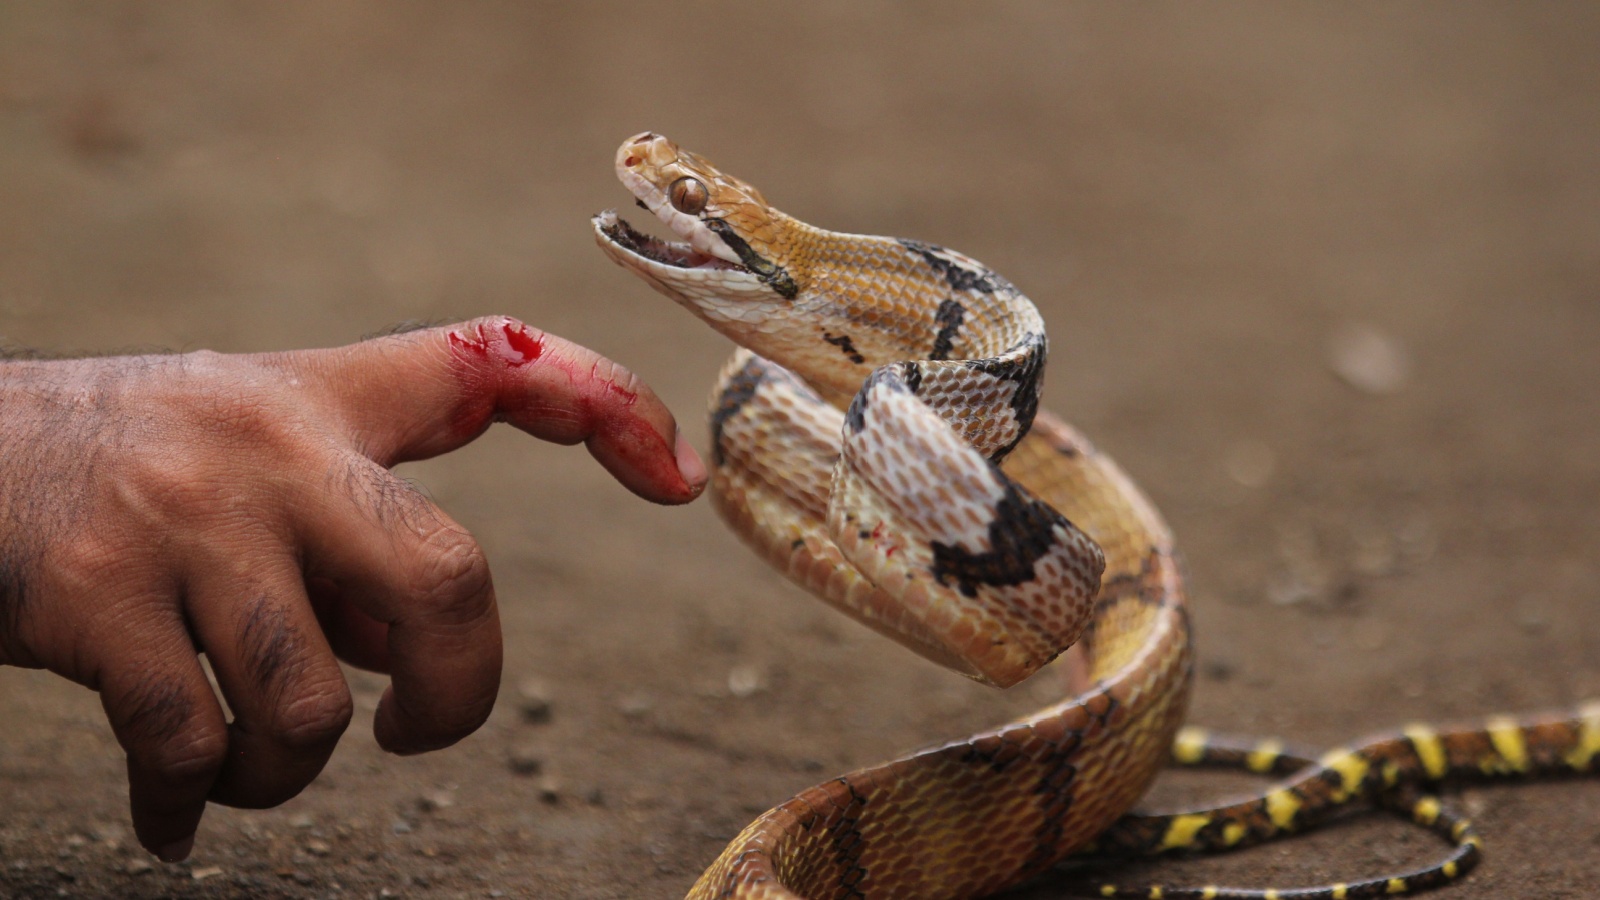 Dog-toothed cat snake bite the human hand.